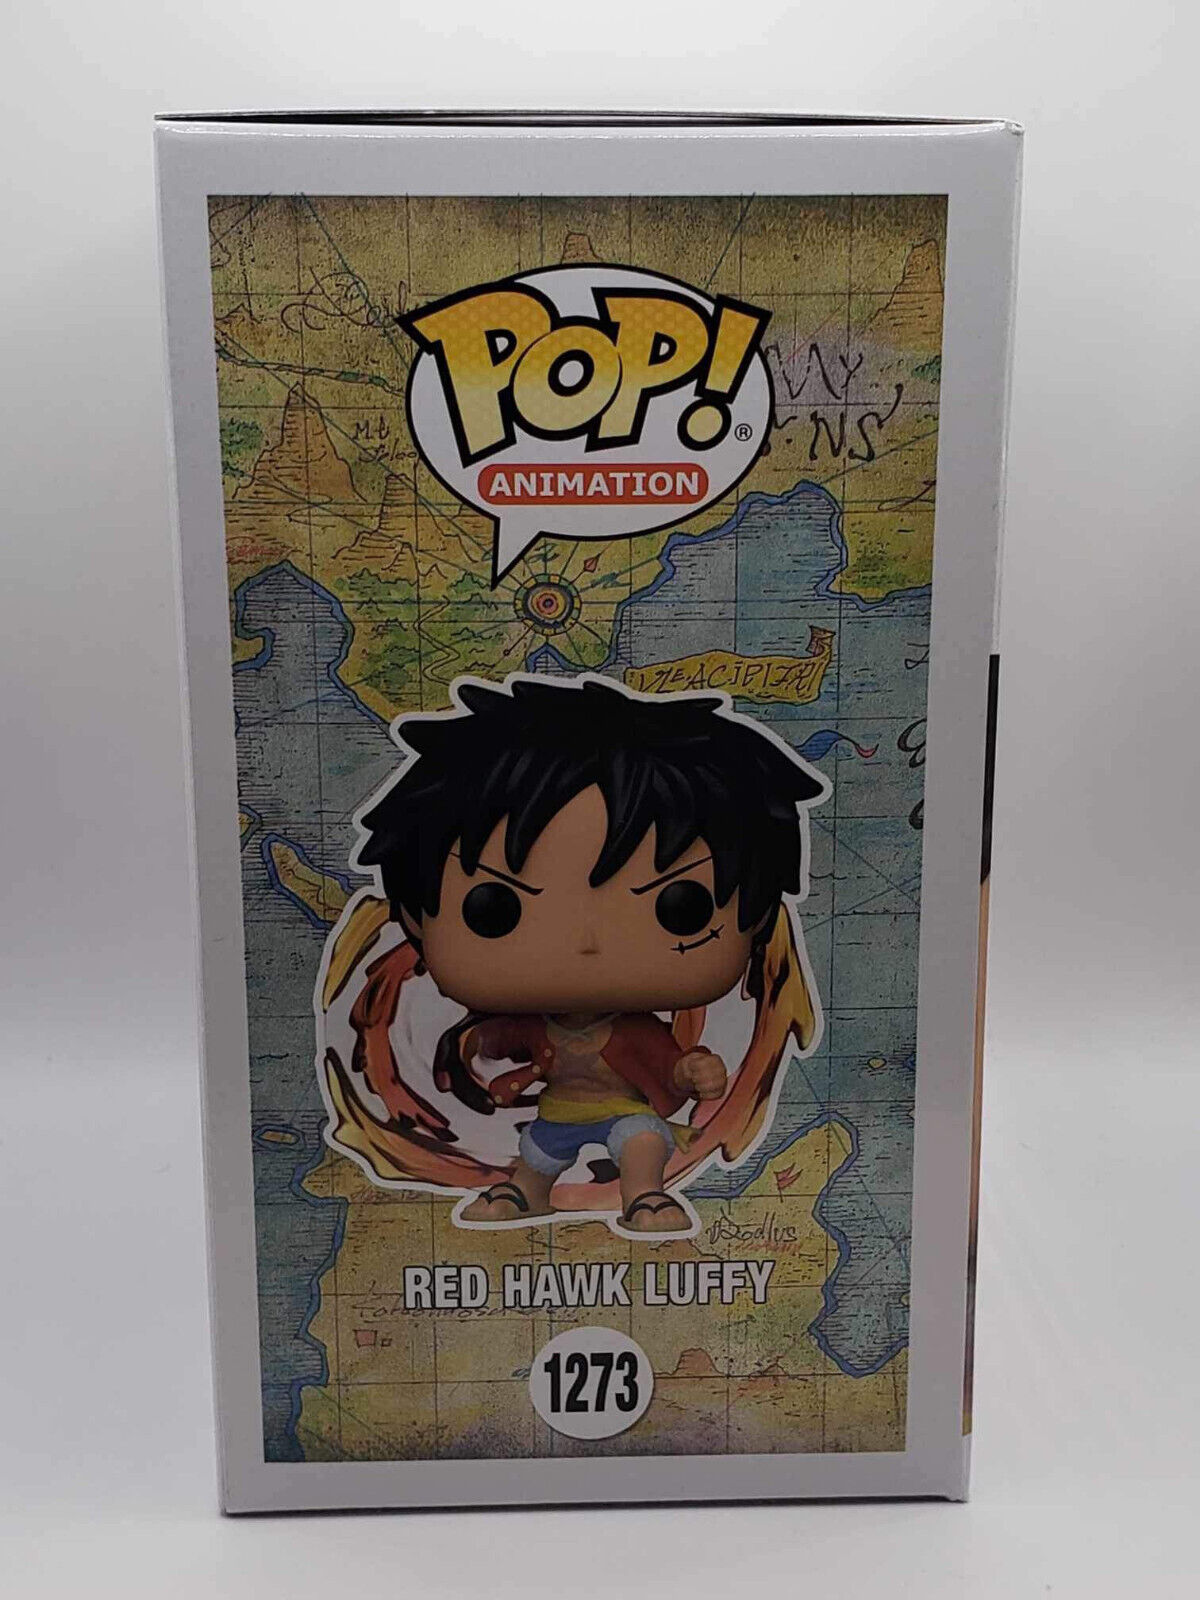 Funko Pop! One Piece Red Hawk Luffy 1273 - AAA Anime Exclusive